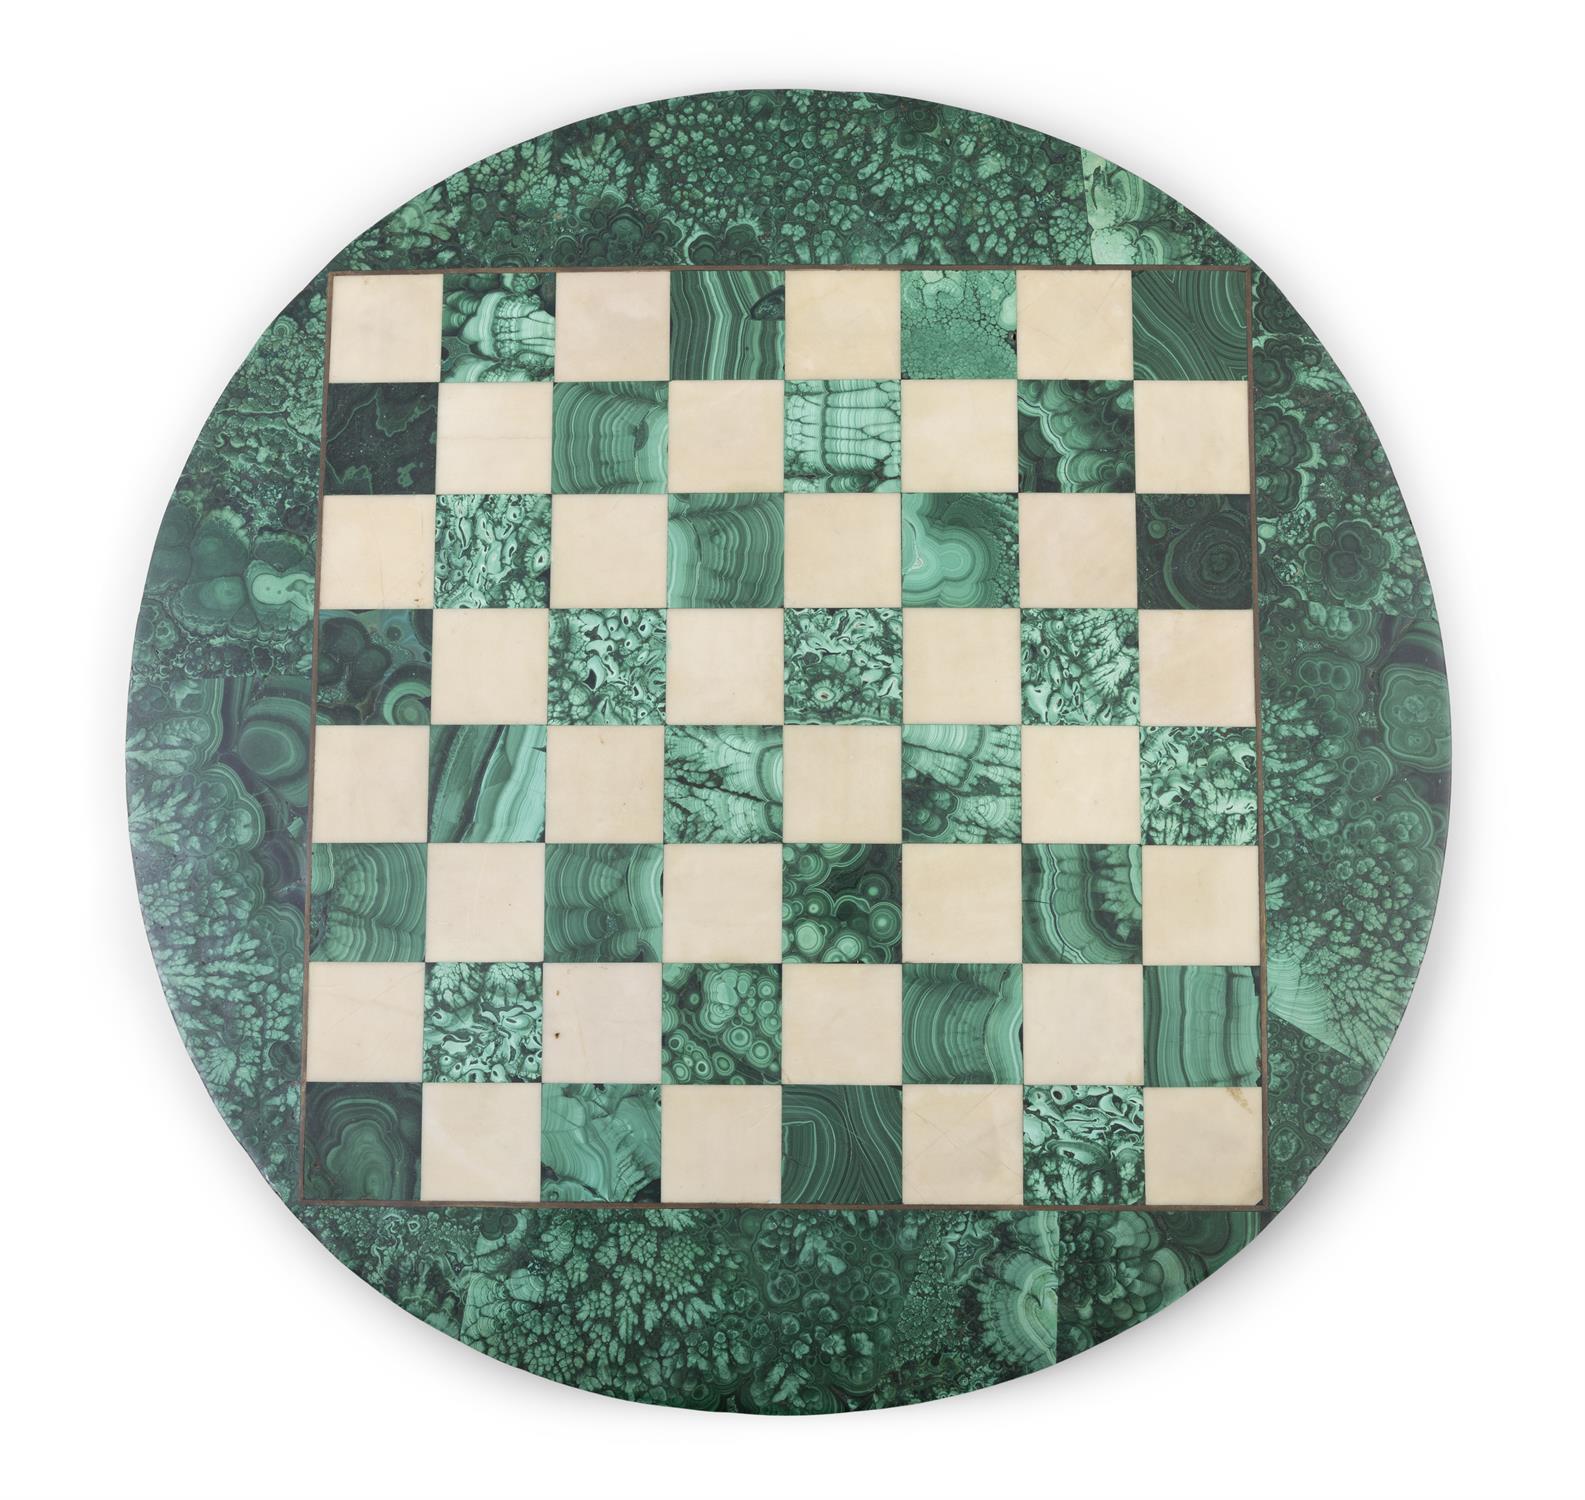 CHESS BOARD A vintage malachite chess board. Italy, c.1970. 43.5cm(d) - Image 2 of 3